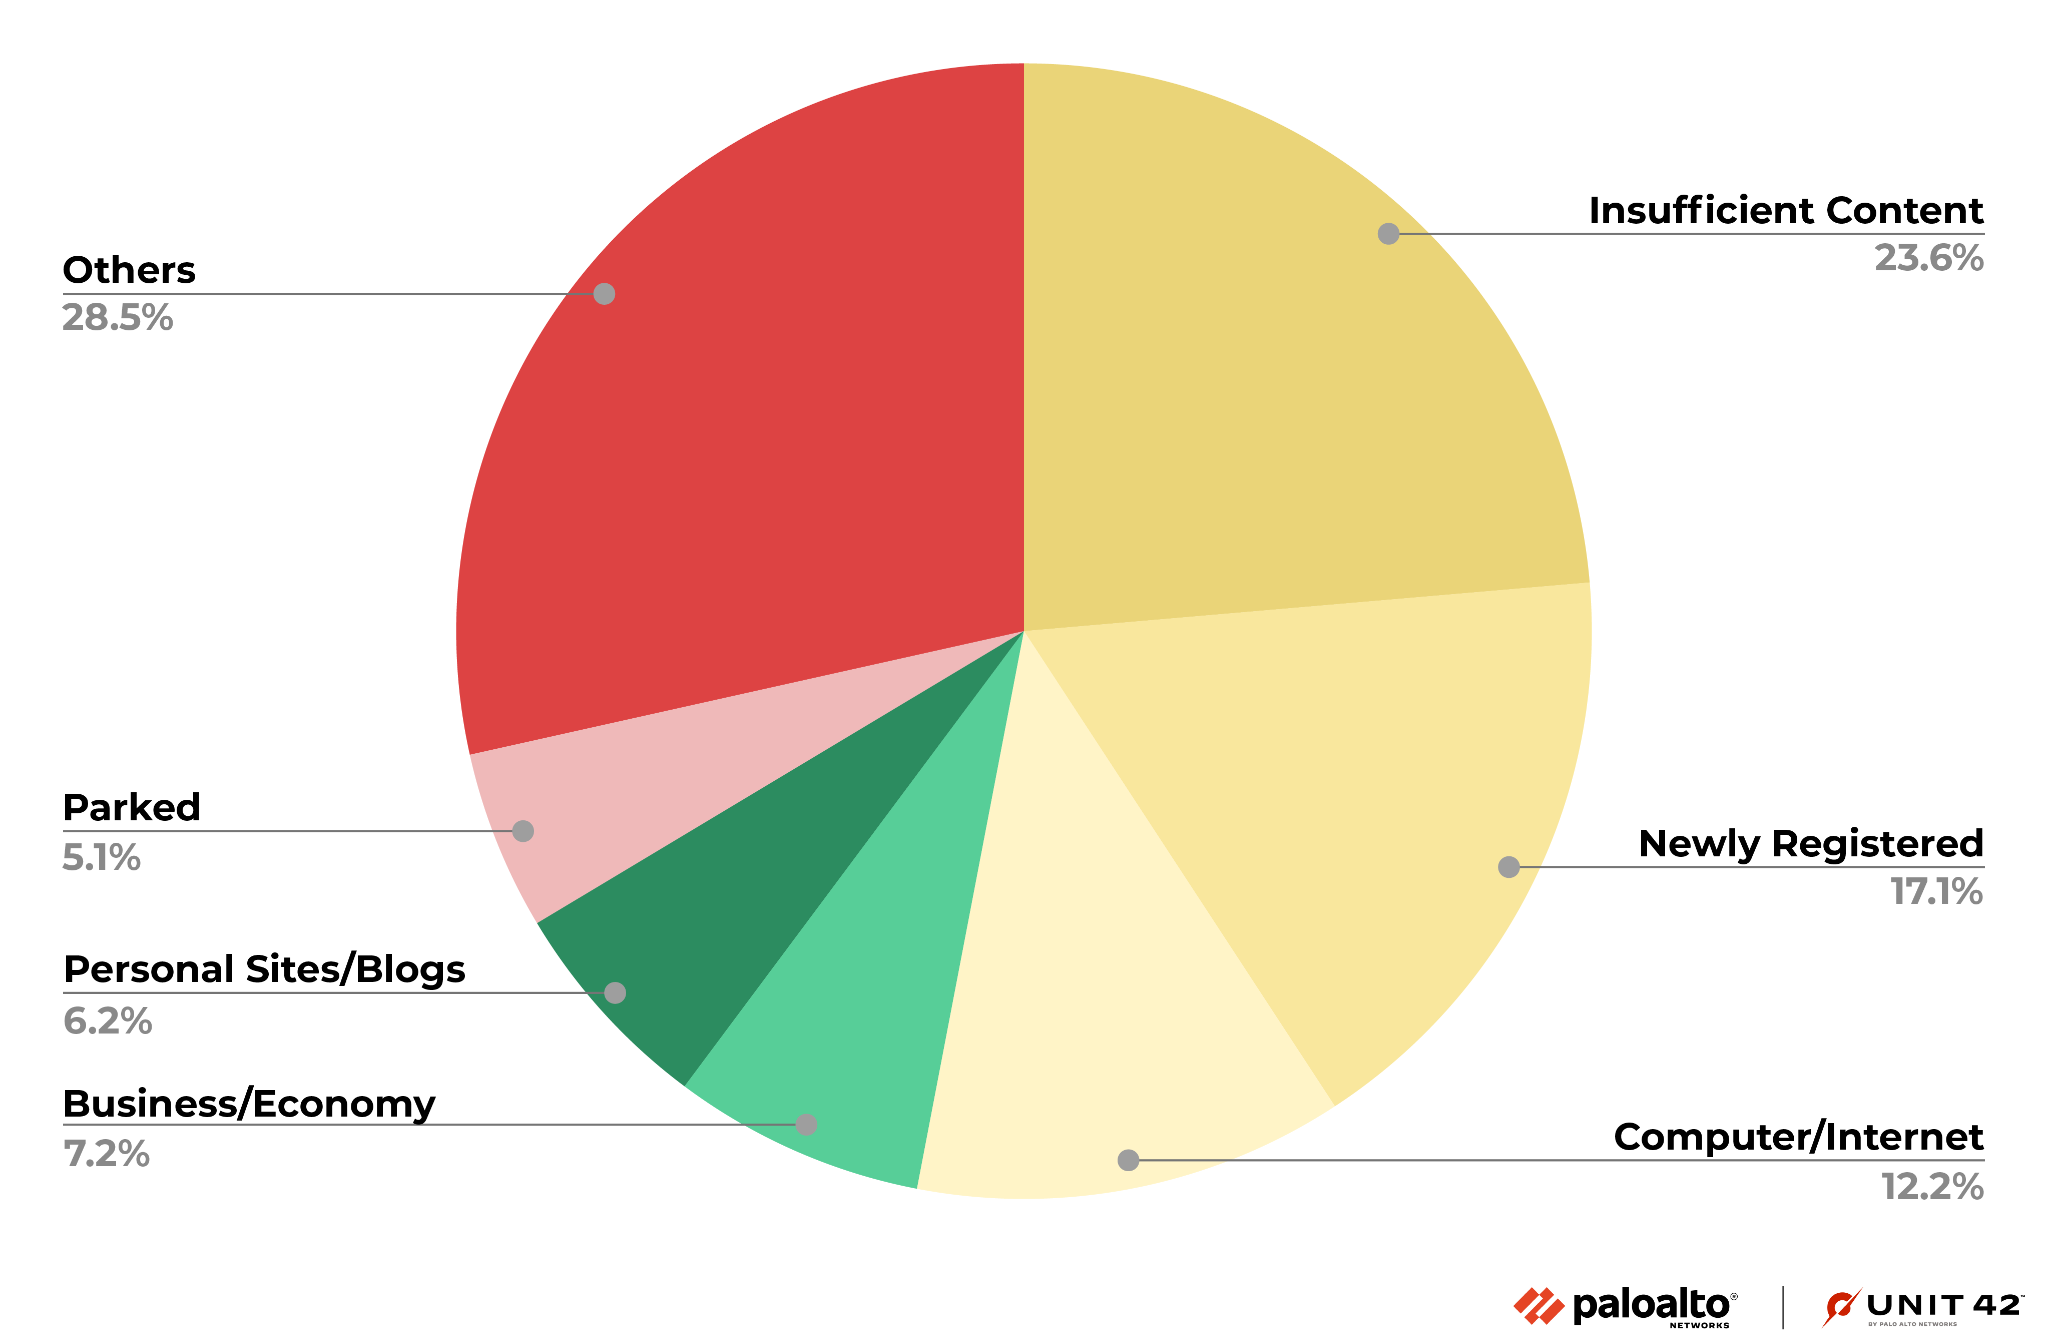 Image 6 is a pie chart of the categories of the URLs before they were identified as malicious during July through December 2022. The largest percentage is “others,” at 28.5%, followed by insufficient content, at 23.6%, and then newly registered domains, at 17.1%. The fourth largest was computer/Internet, at 12.2%.